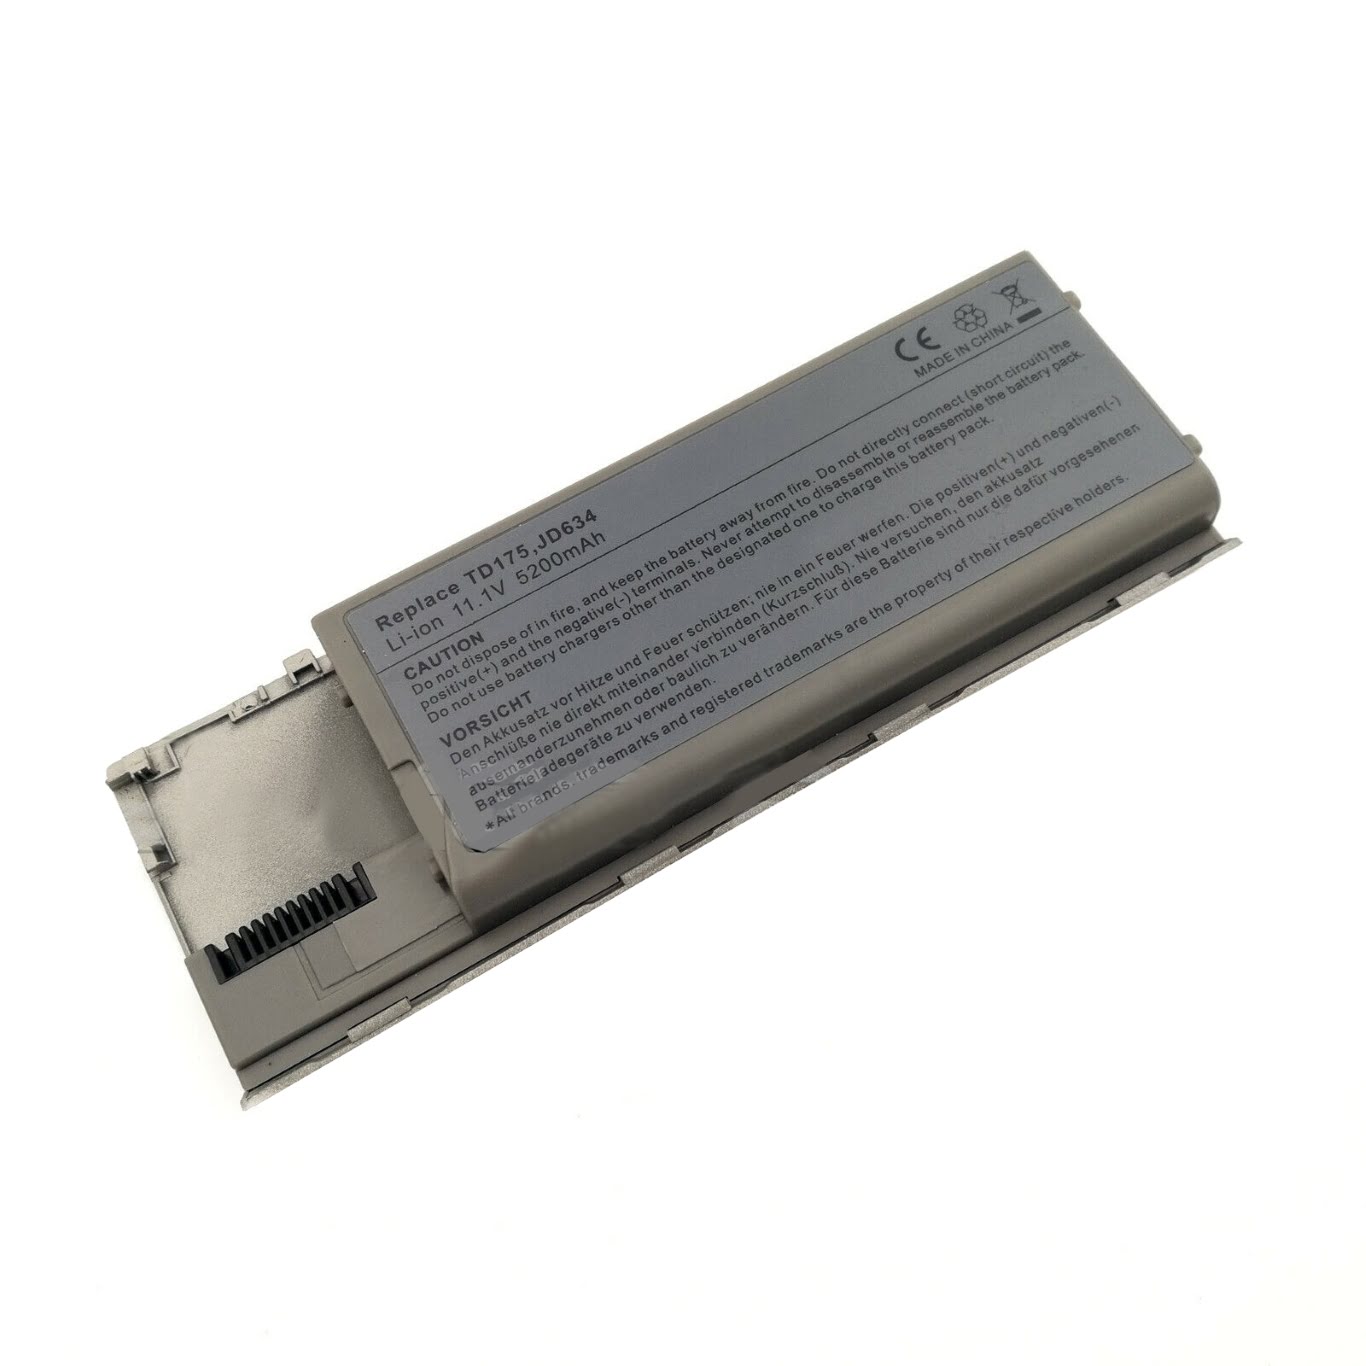 0GD775, 0GD776 replacement Laptop Battery for Dell Latitude D620, Latitude D620 ATG, 4400mah/49wh, 6 cells, 11.1V